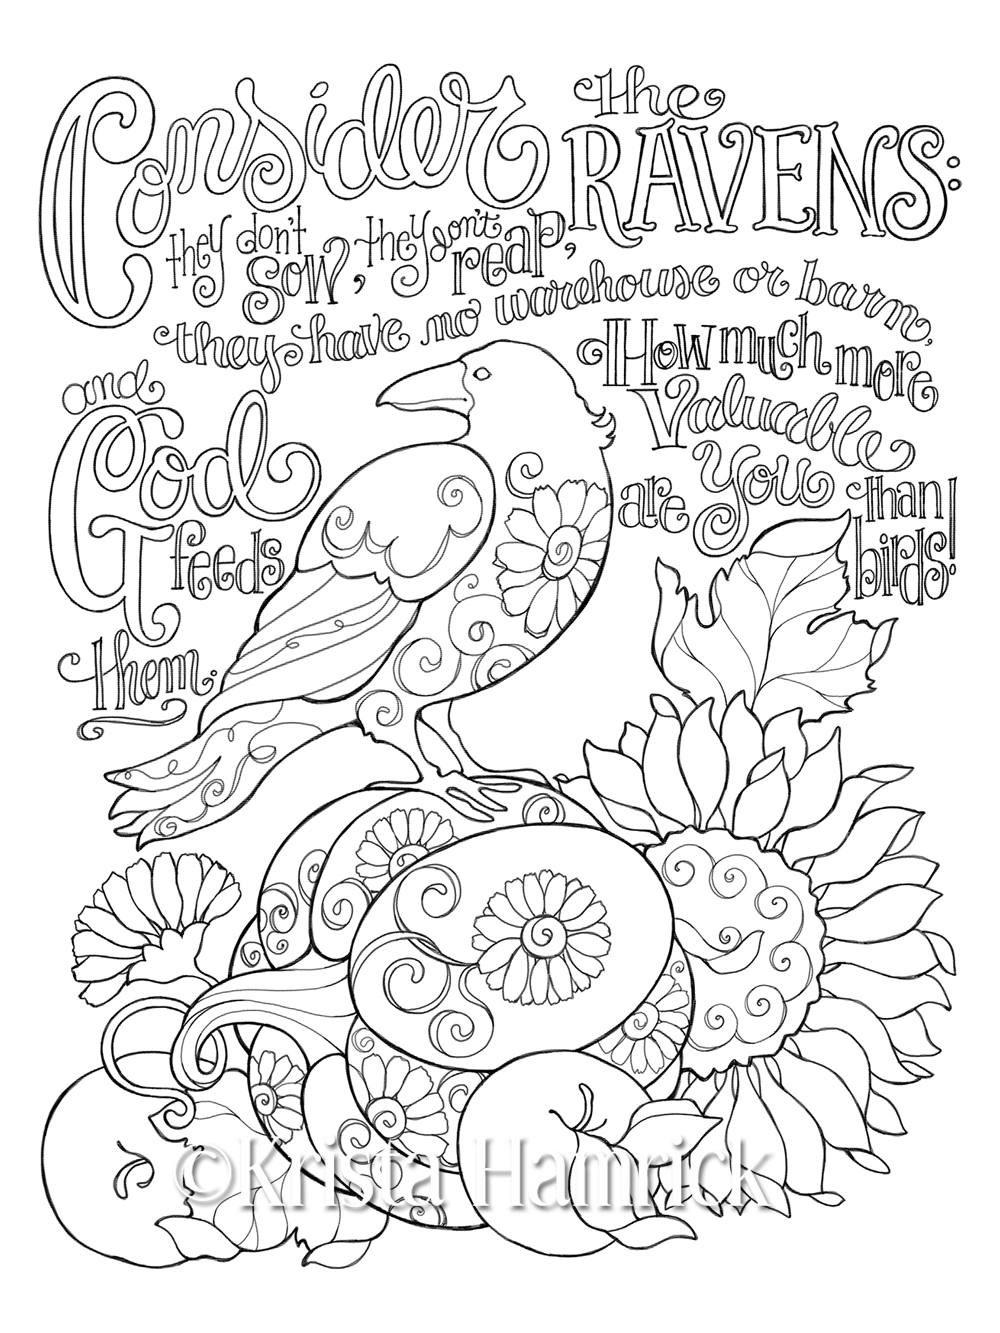 Download Consider the Ravens coloring page 8.5X11 Bible journaling ...